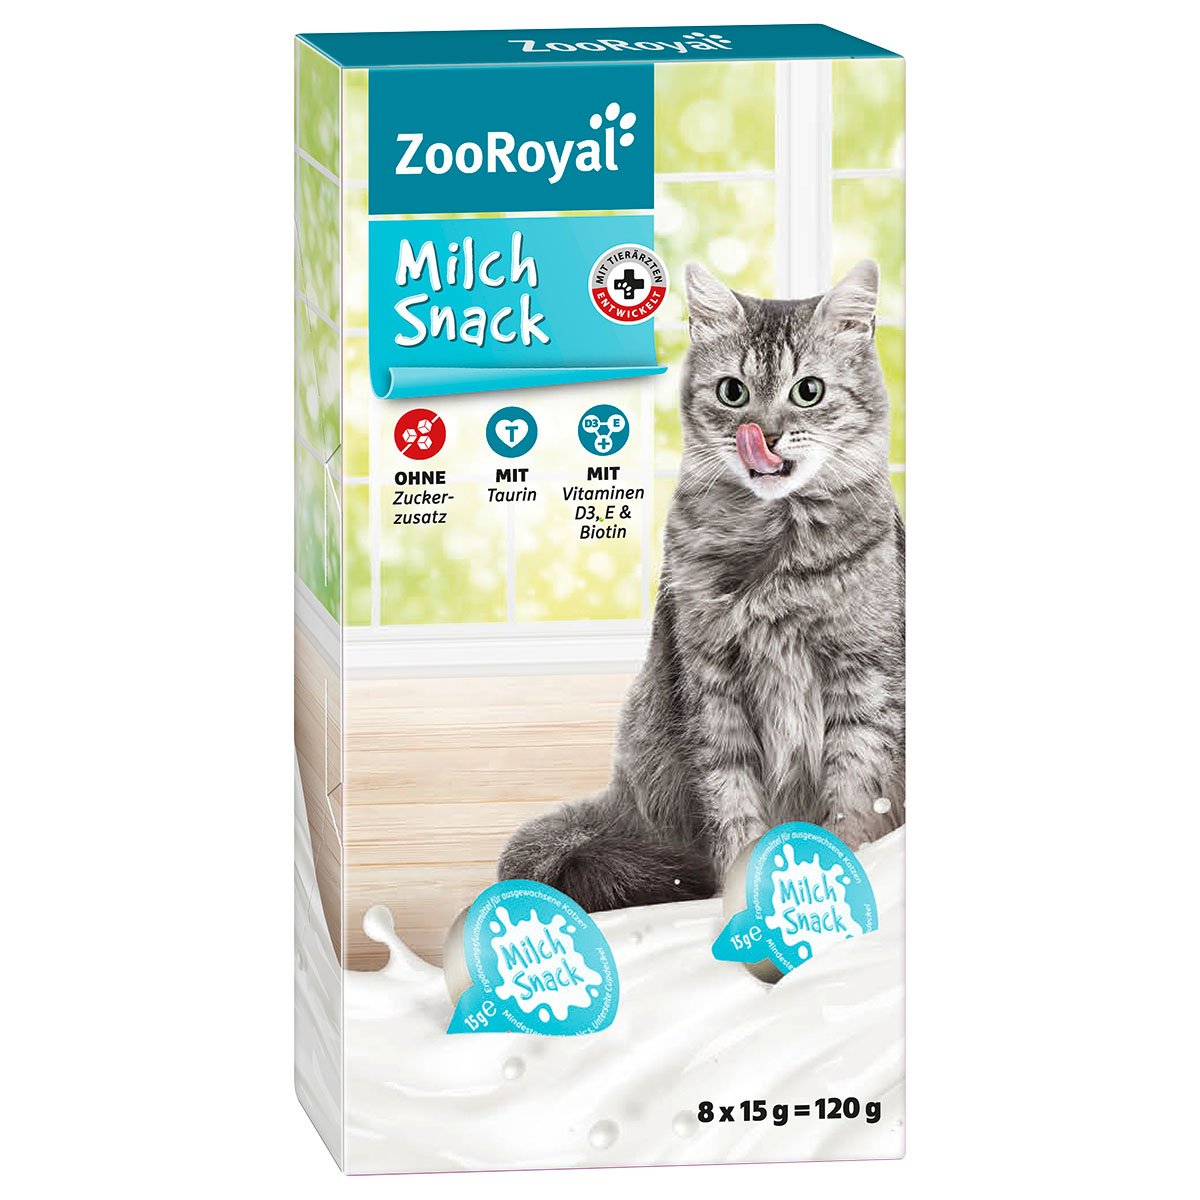 ZooRoyal Milch Snack 8x15g